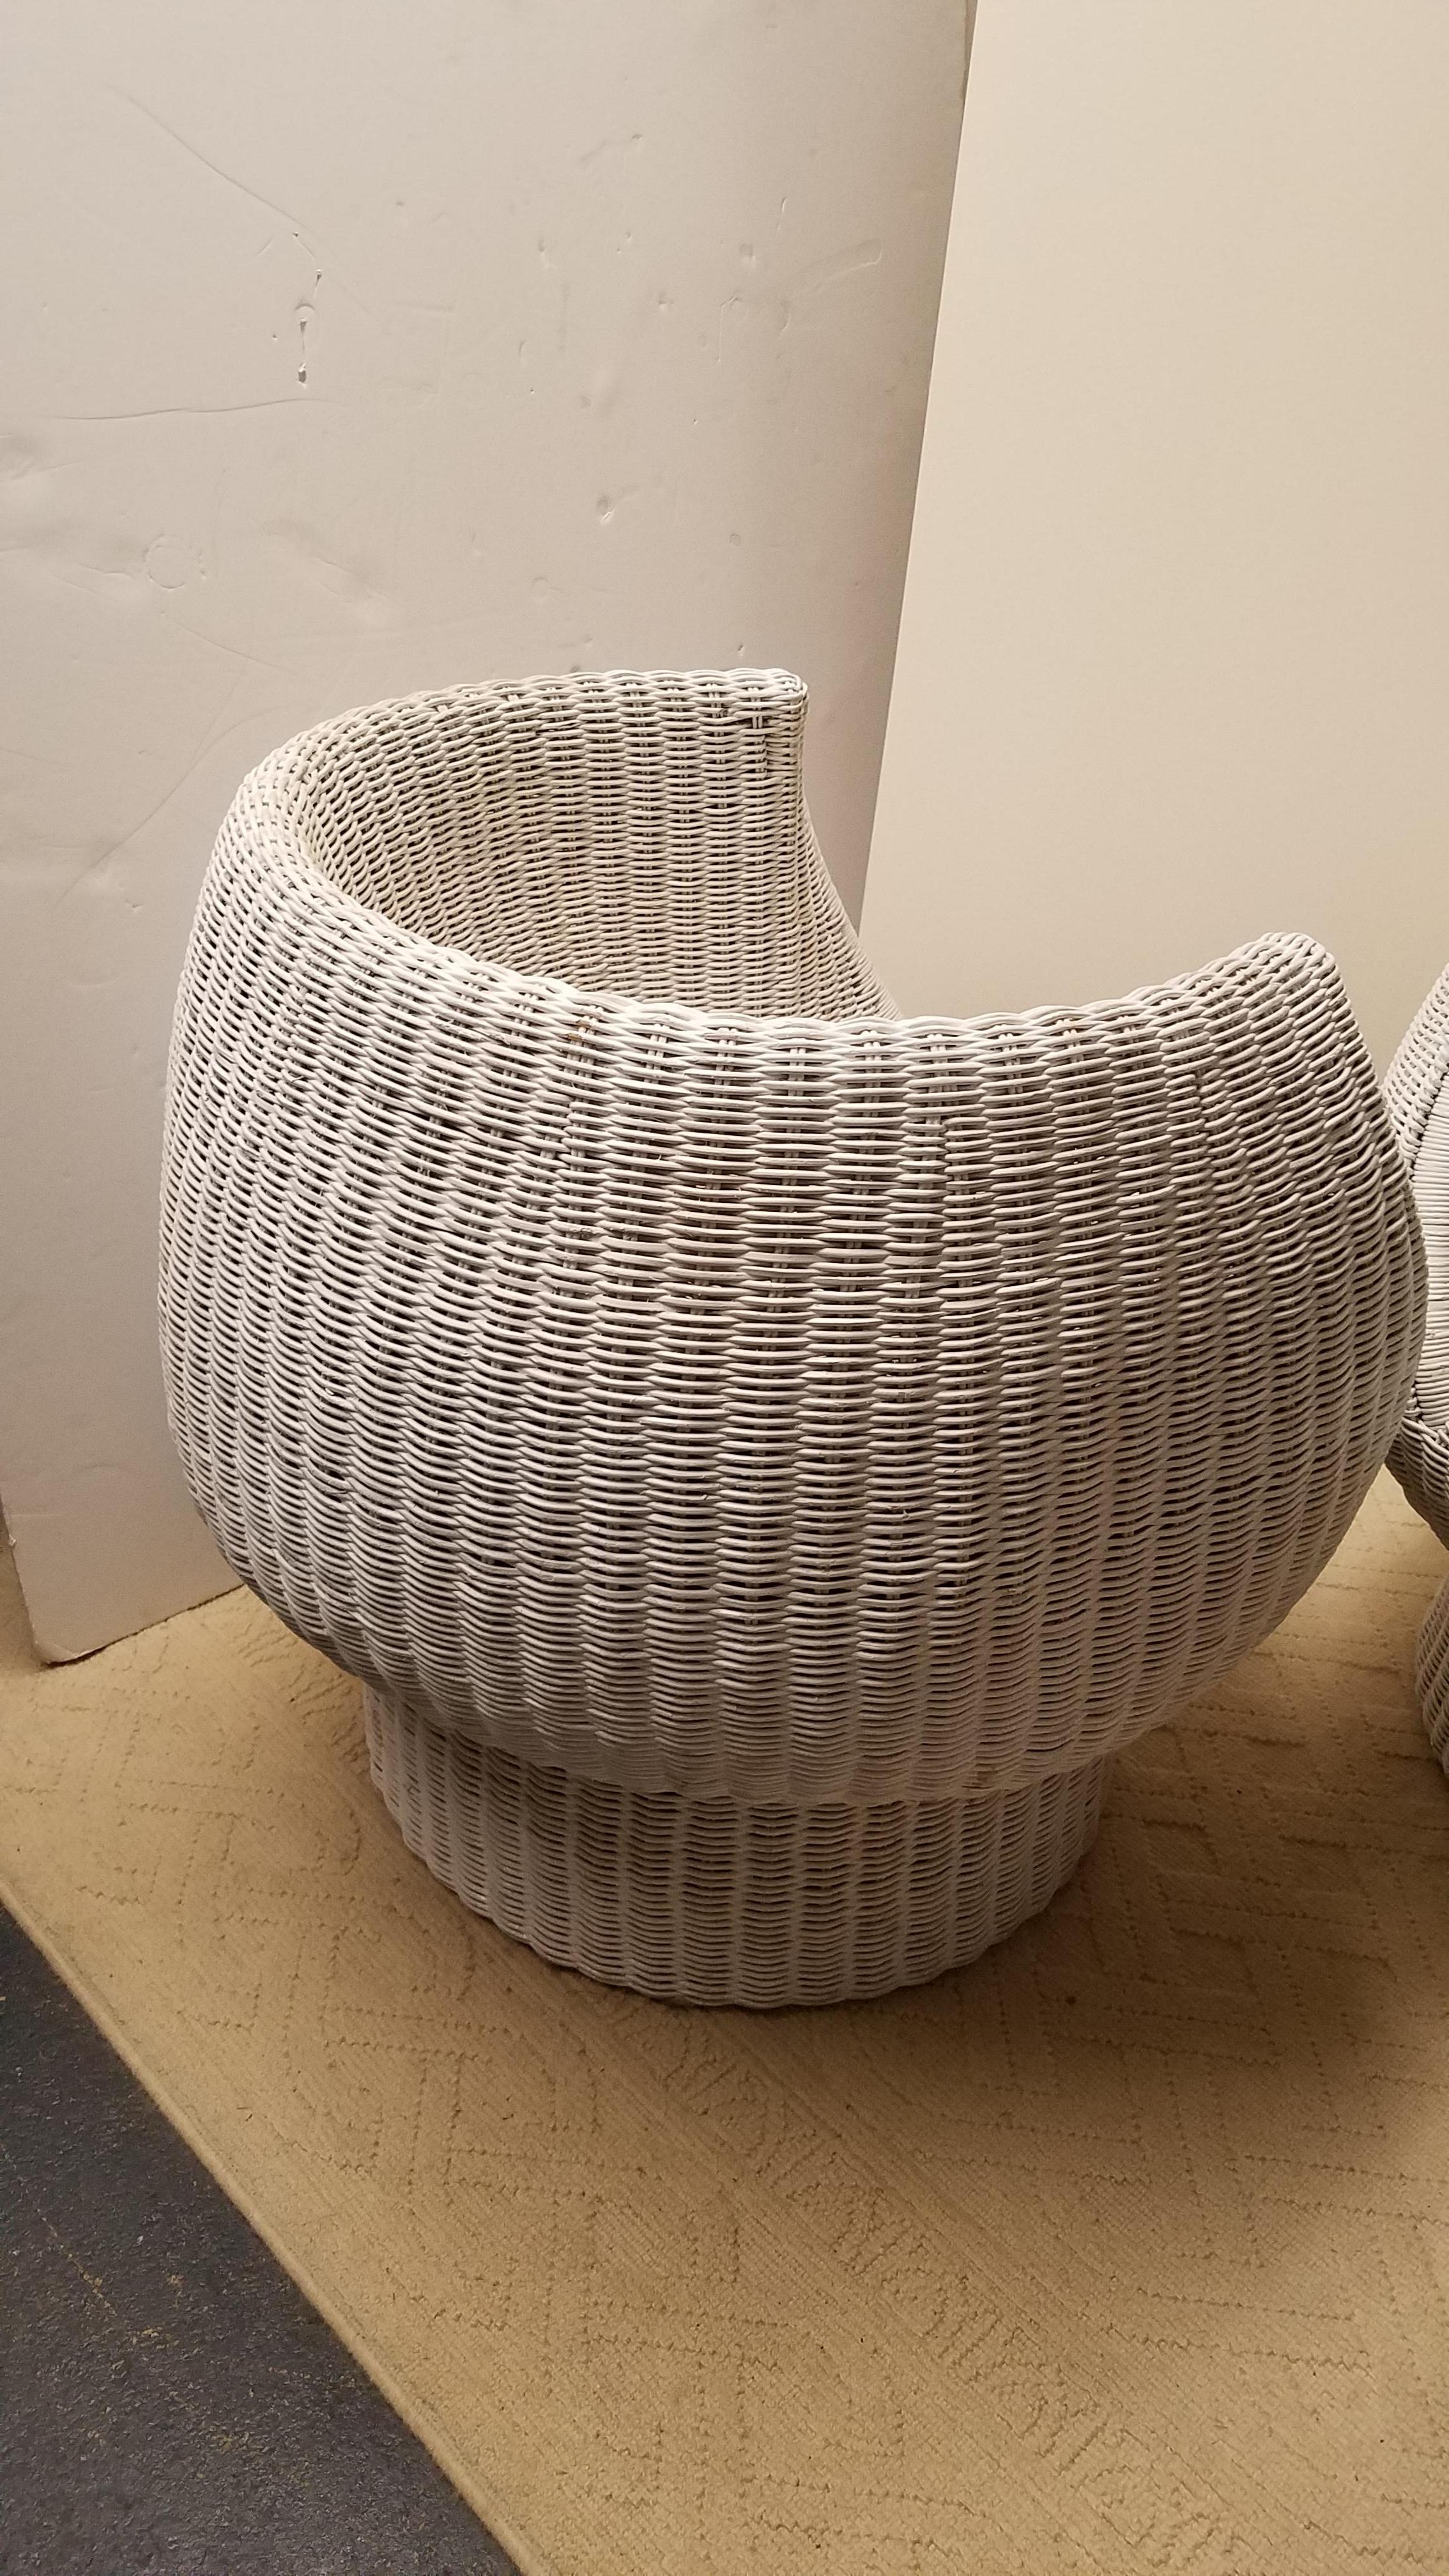 Style of Eero Aarnio pair of Mid-Century modern white wicker bubble chairs. Original paint in excellent condition. Slight rubbing on the back of one chair, but does not detract and wicker is not broken.
Measures: Seat height 16